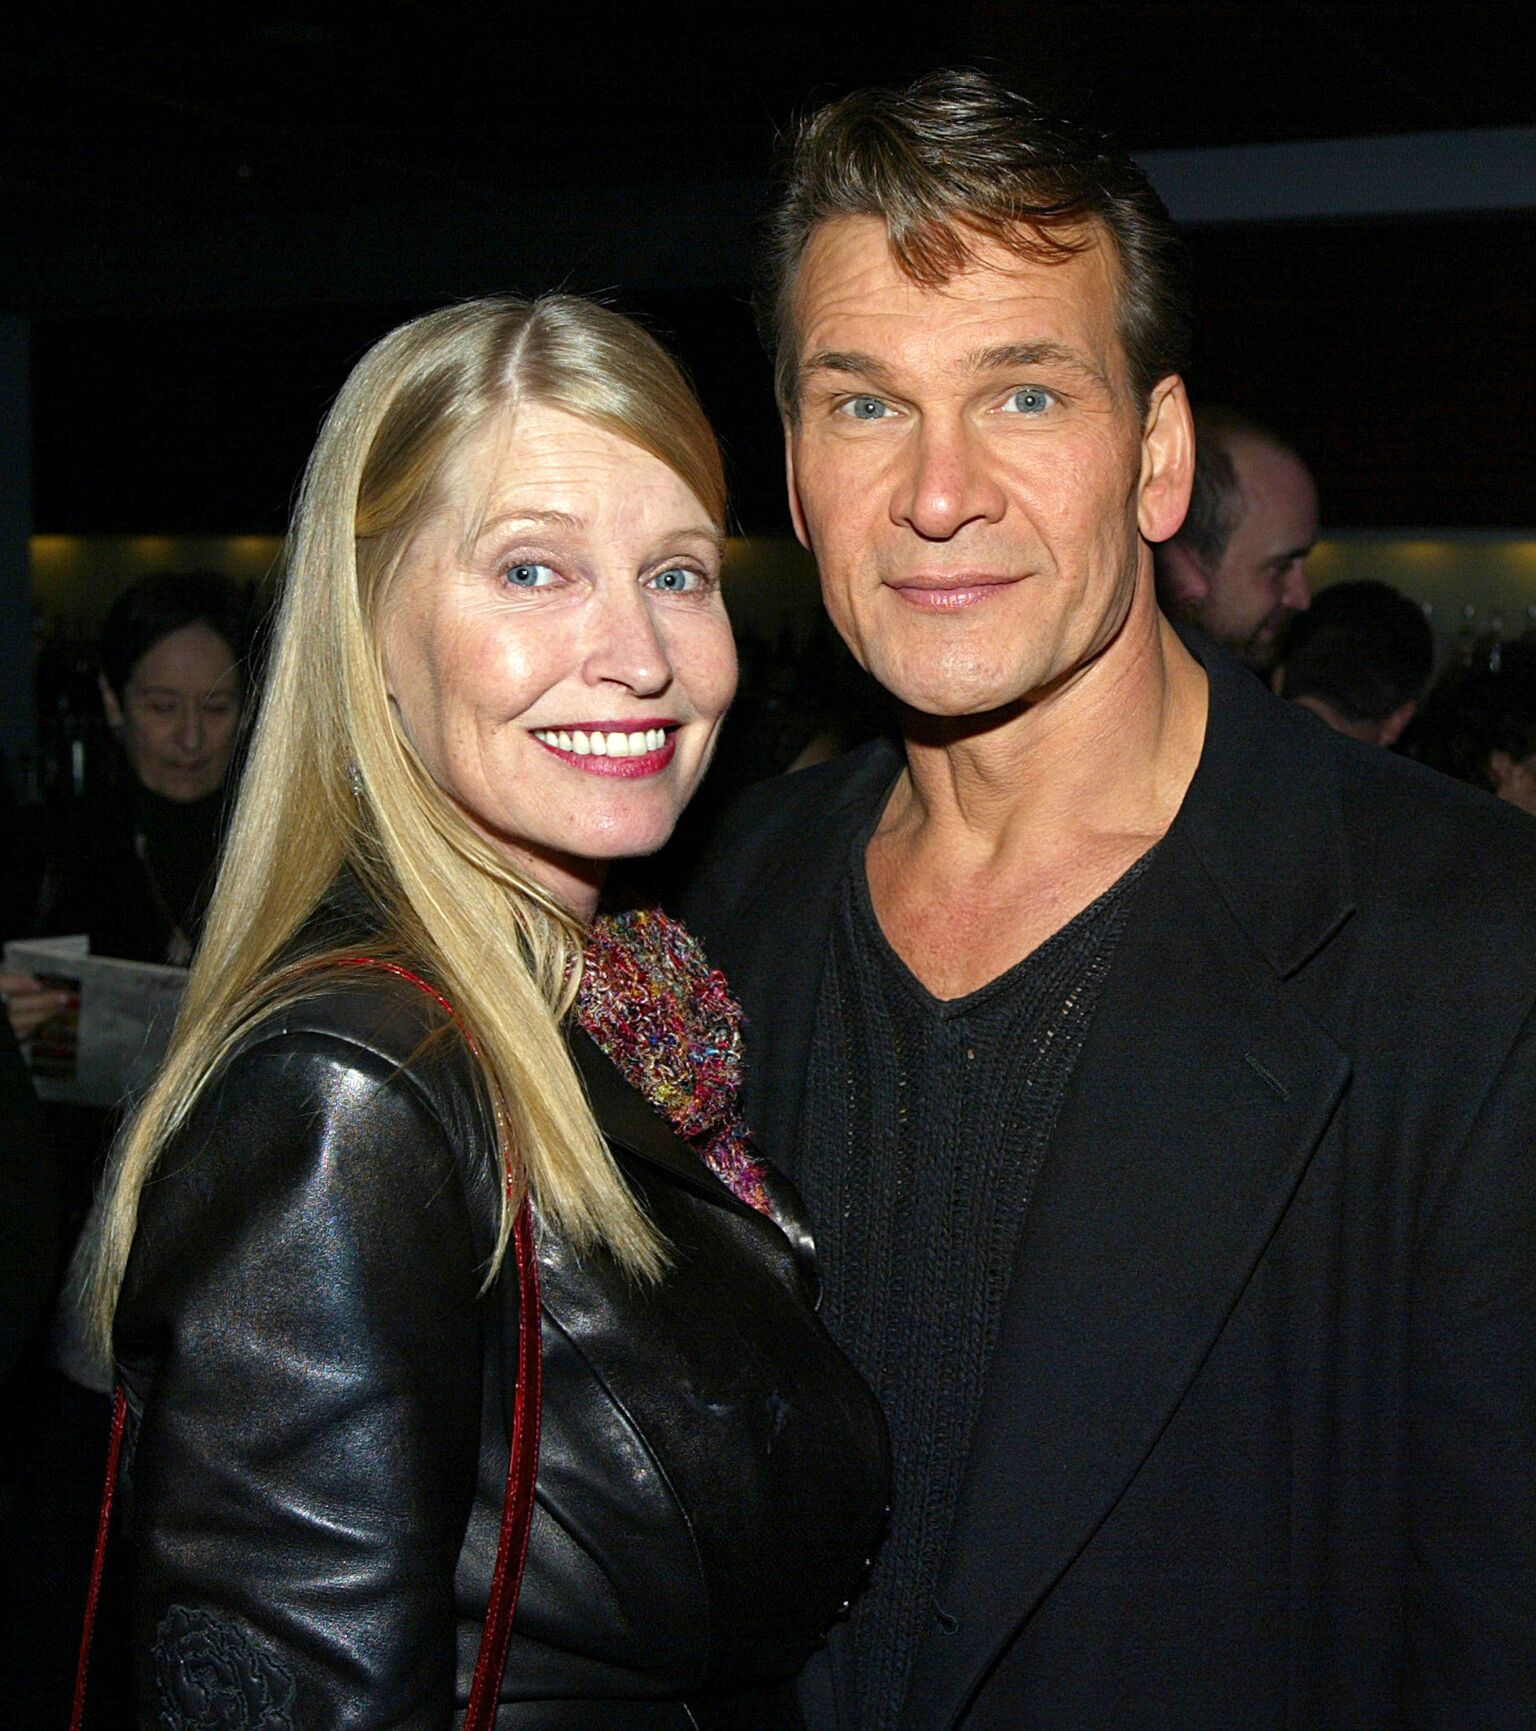 Patrick Swayze and his wife Lisa Niemi arrive at the after-party for "Chicago - The Musical" | Getty Images